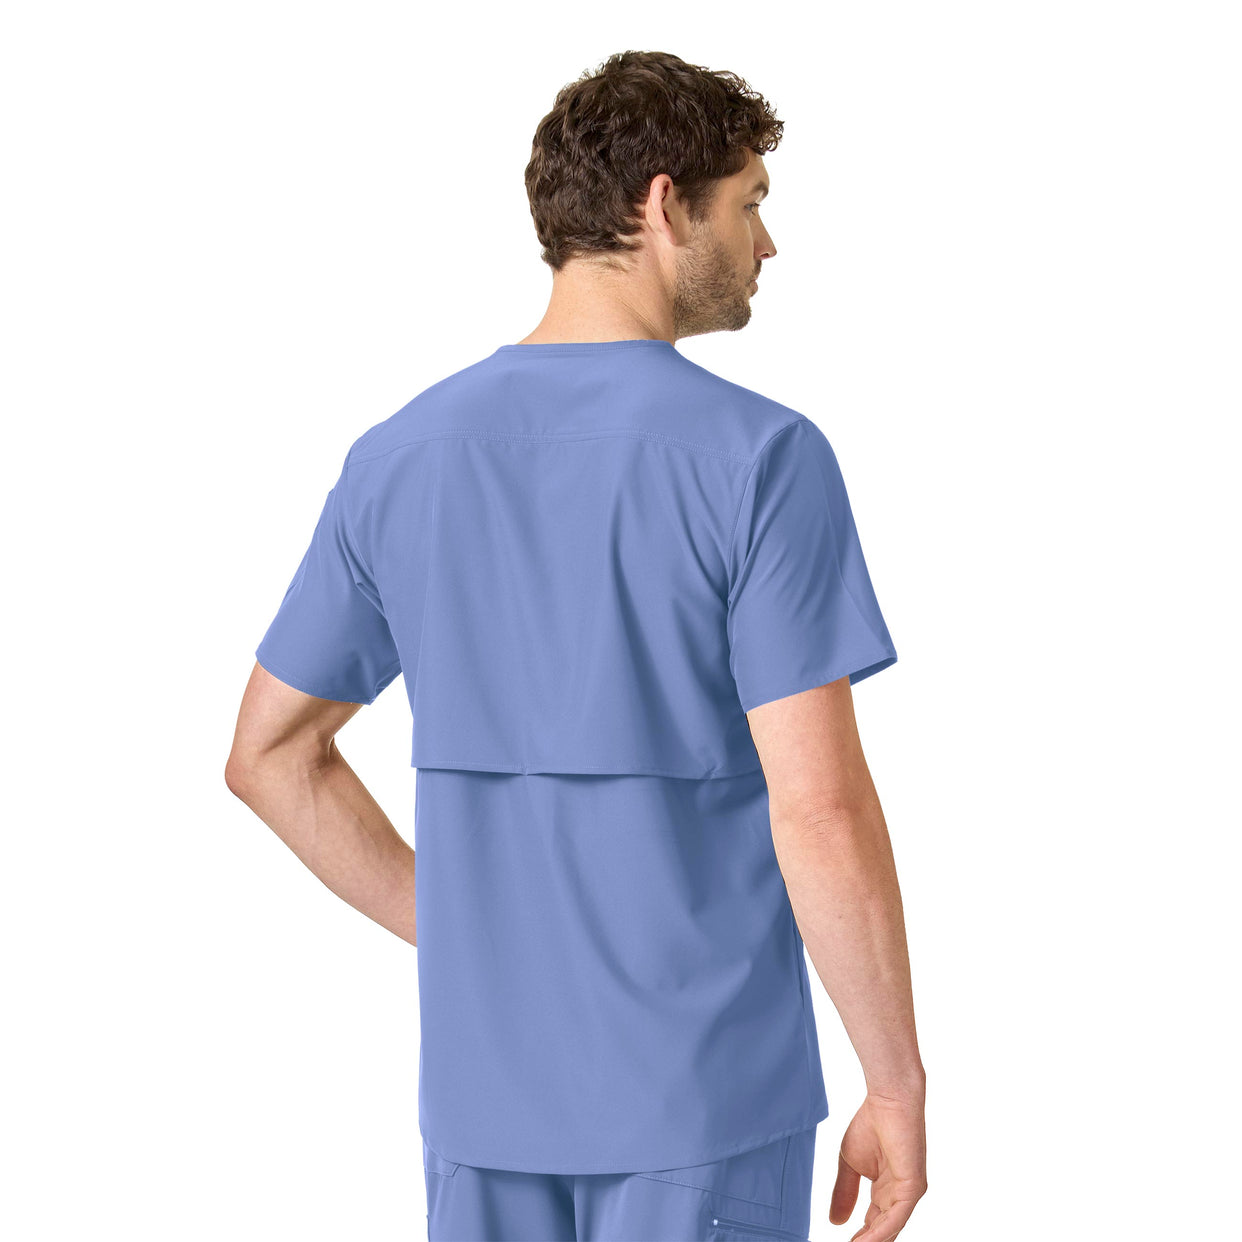 Force Liberty Men's Twill Chest Pocket Scrub Top Ceil Blue back view